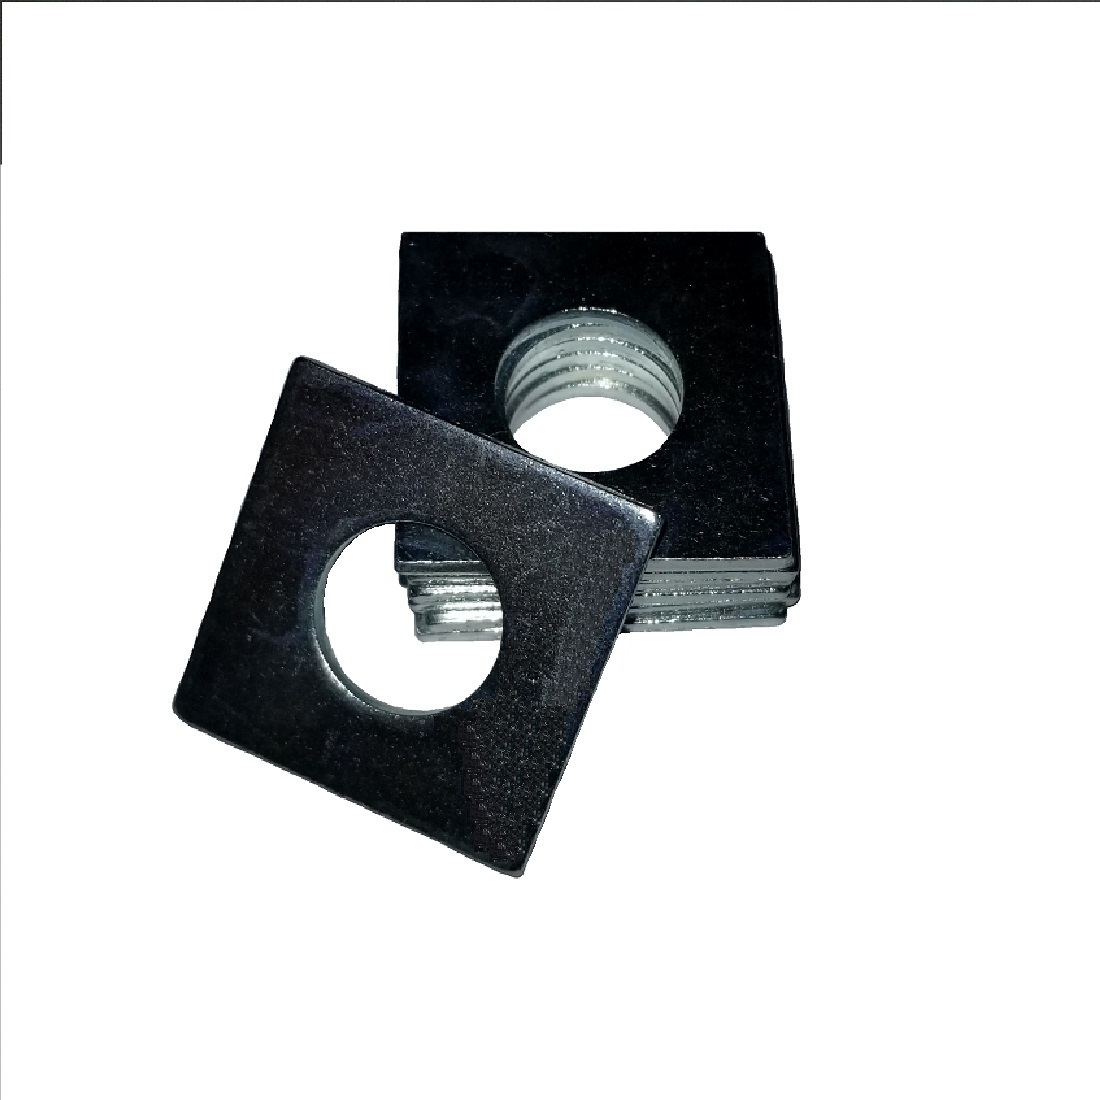 Square OD Washer - 0.437 ID, 0.656 OD, 0.079 Thick, Low Carbon Steel - Soft, Galvanized